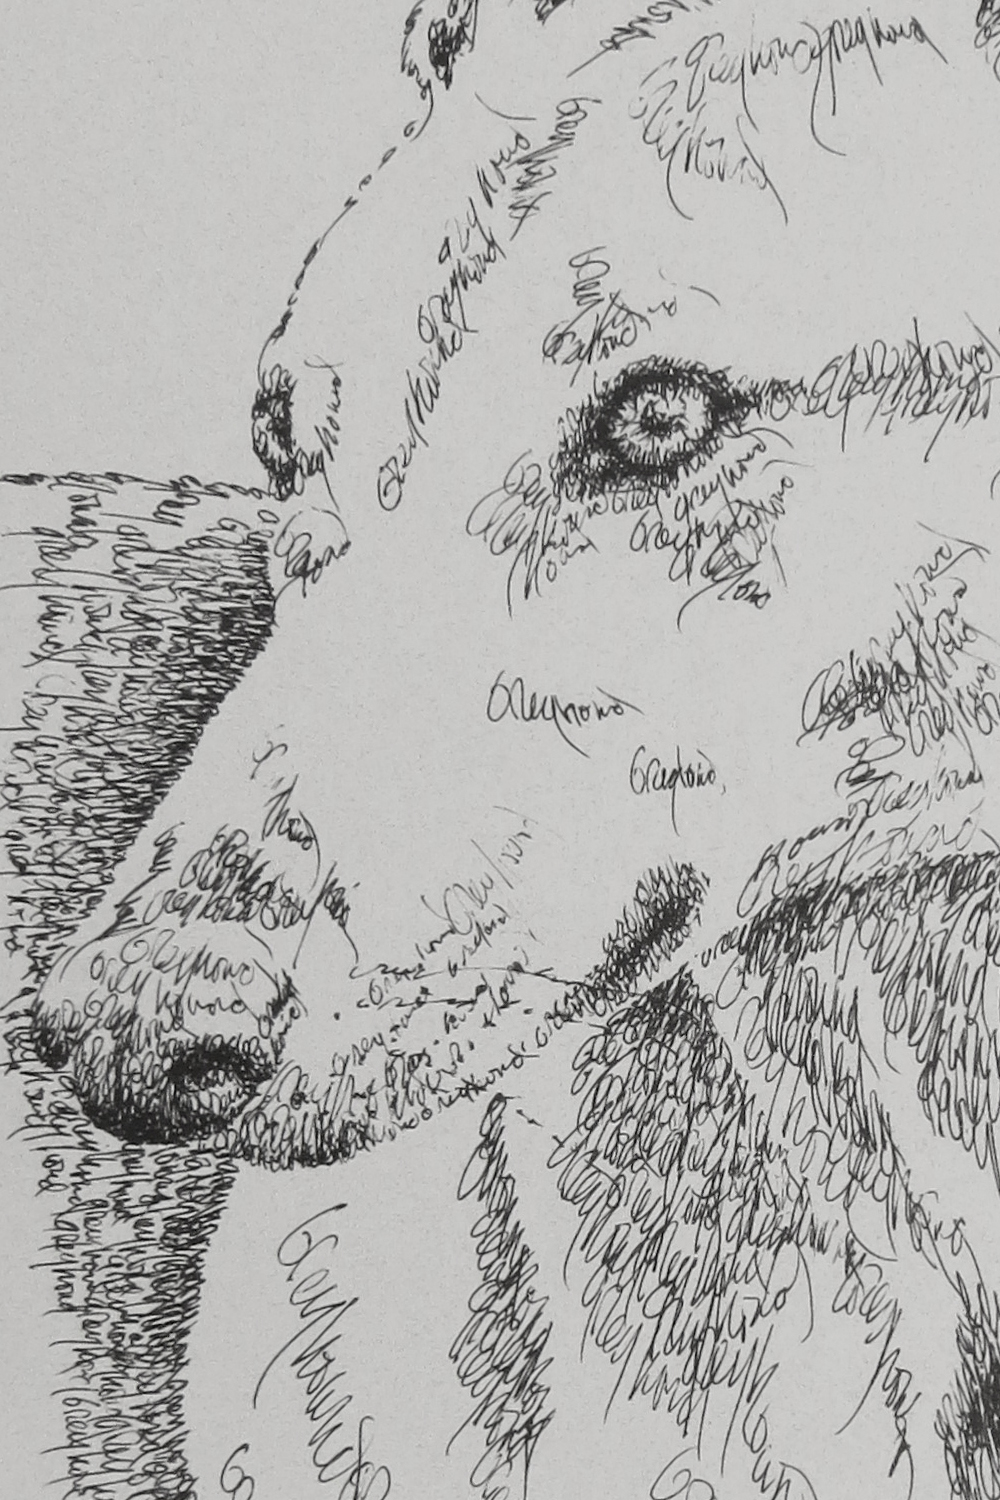 GREYHOUND DOG #336 ART DRAWN FROM WORDS Stephen Kline adds dogs name free GIFT 